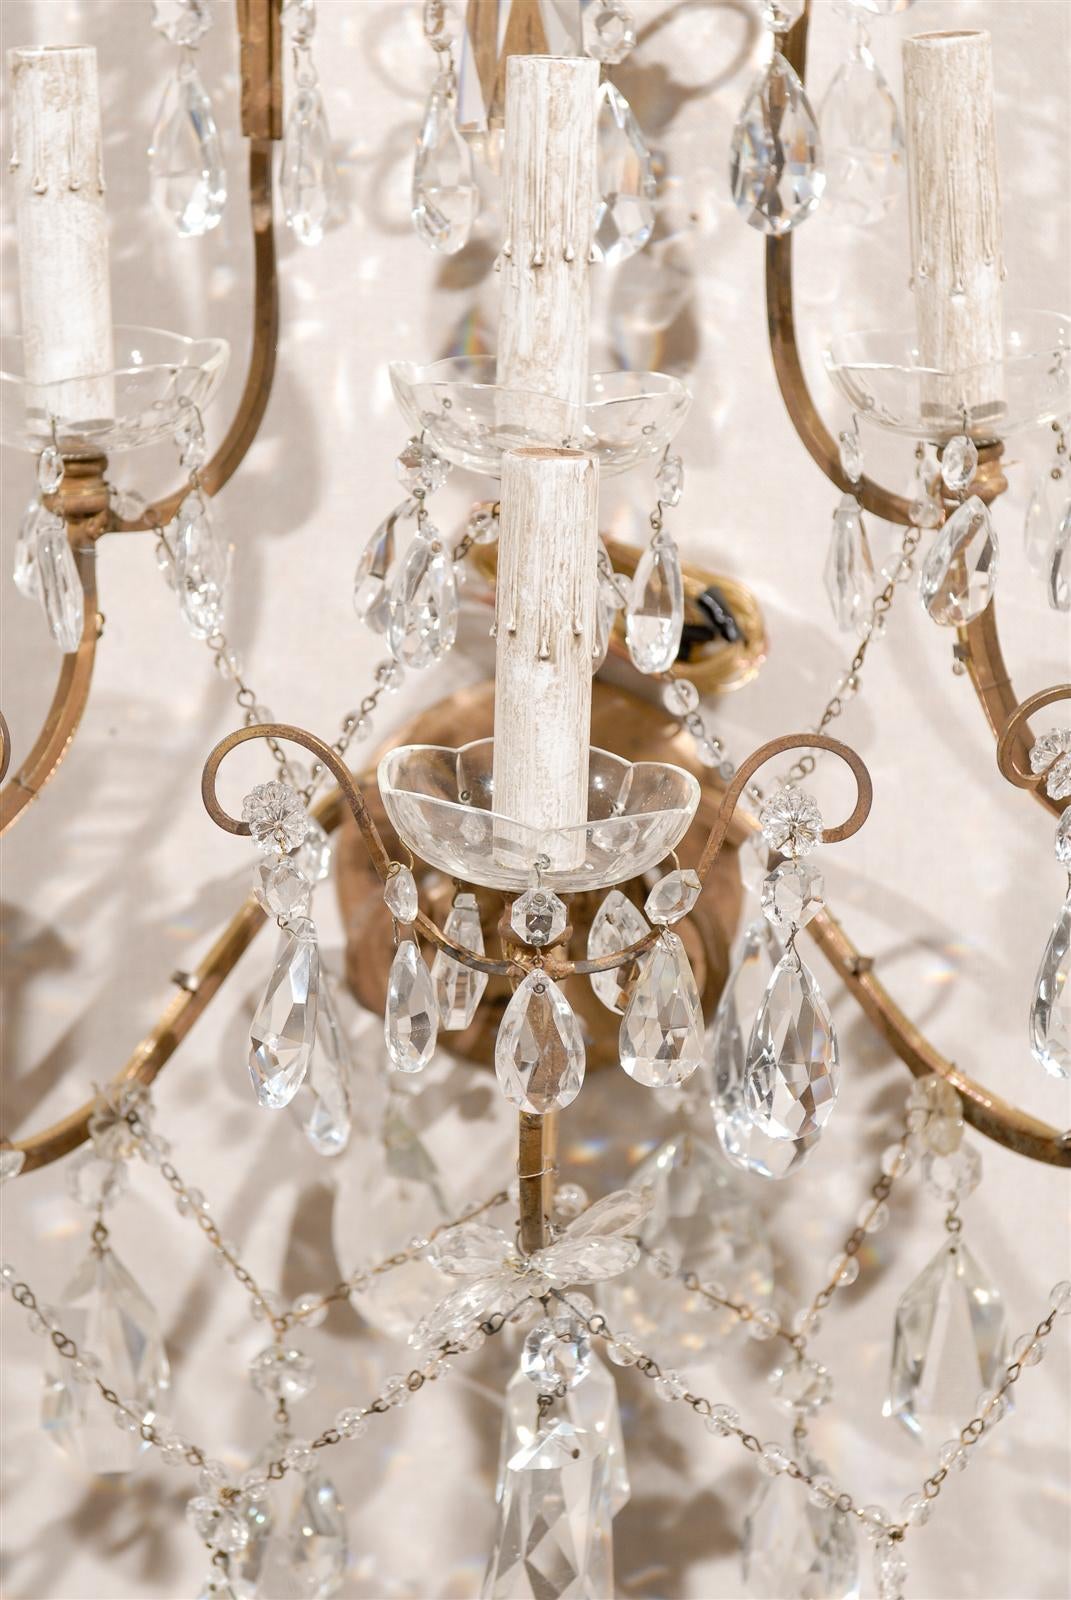 A Pair of Italian Crystal Six-Light Sconces with Beautiful Draping Ornamentation 1